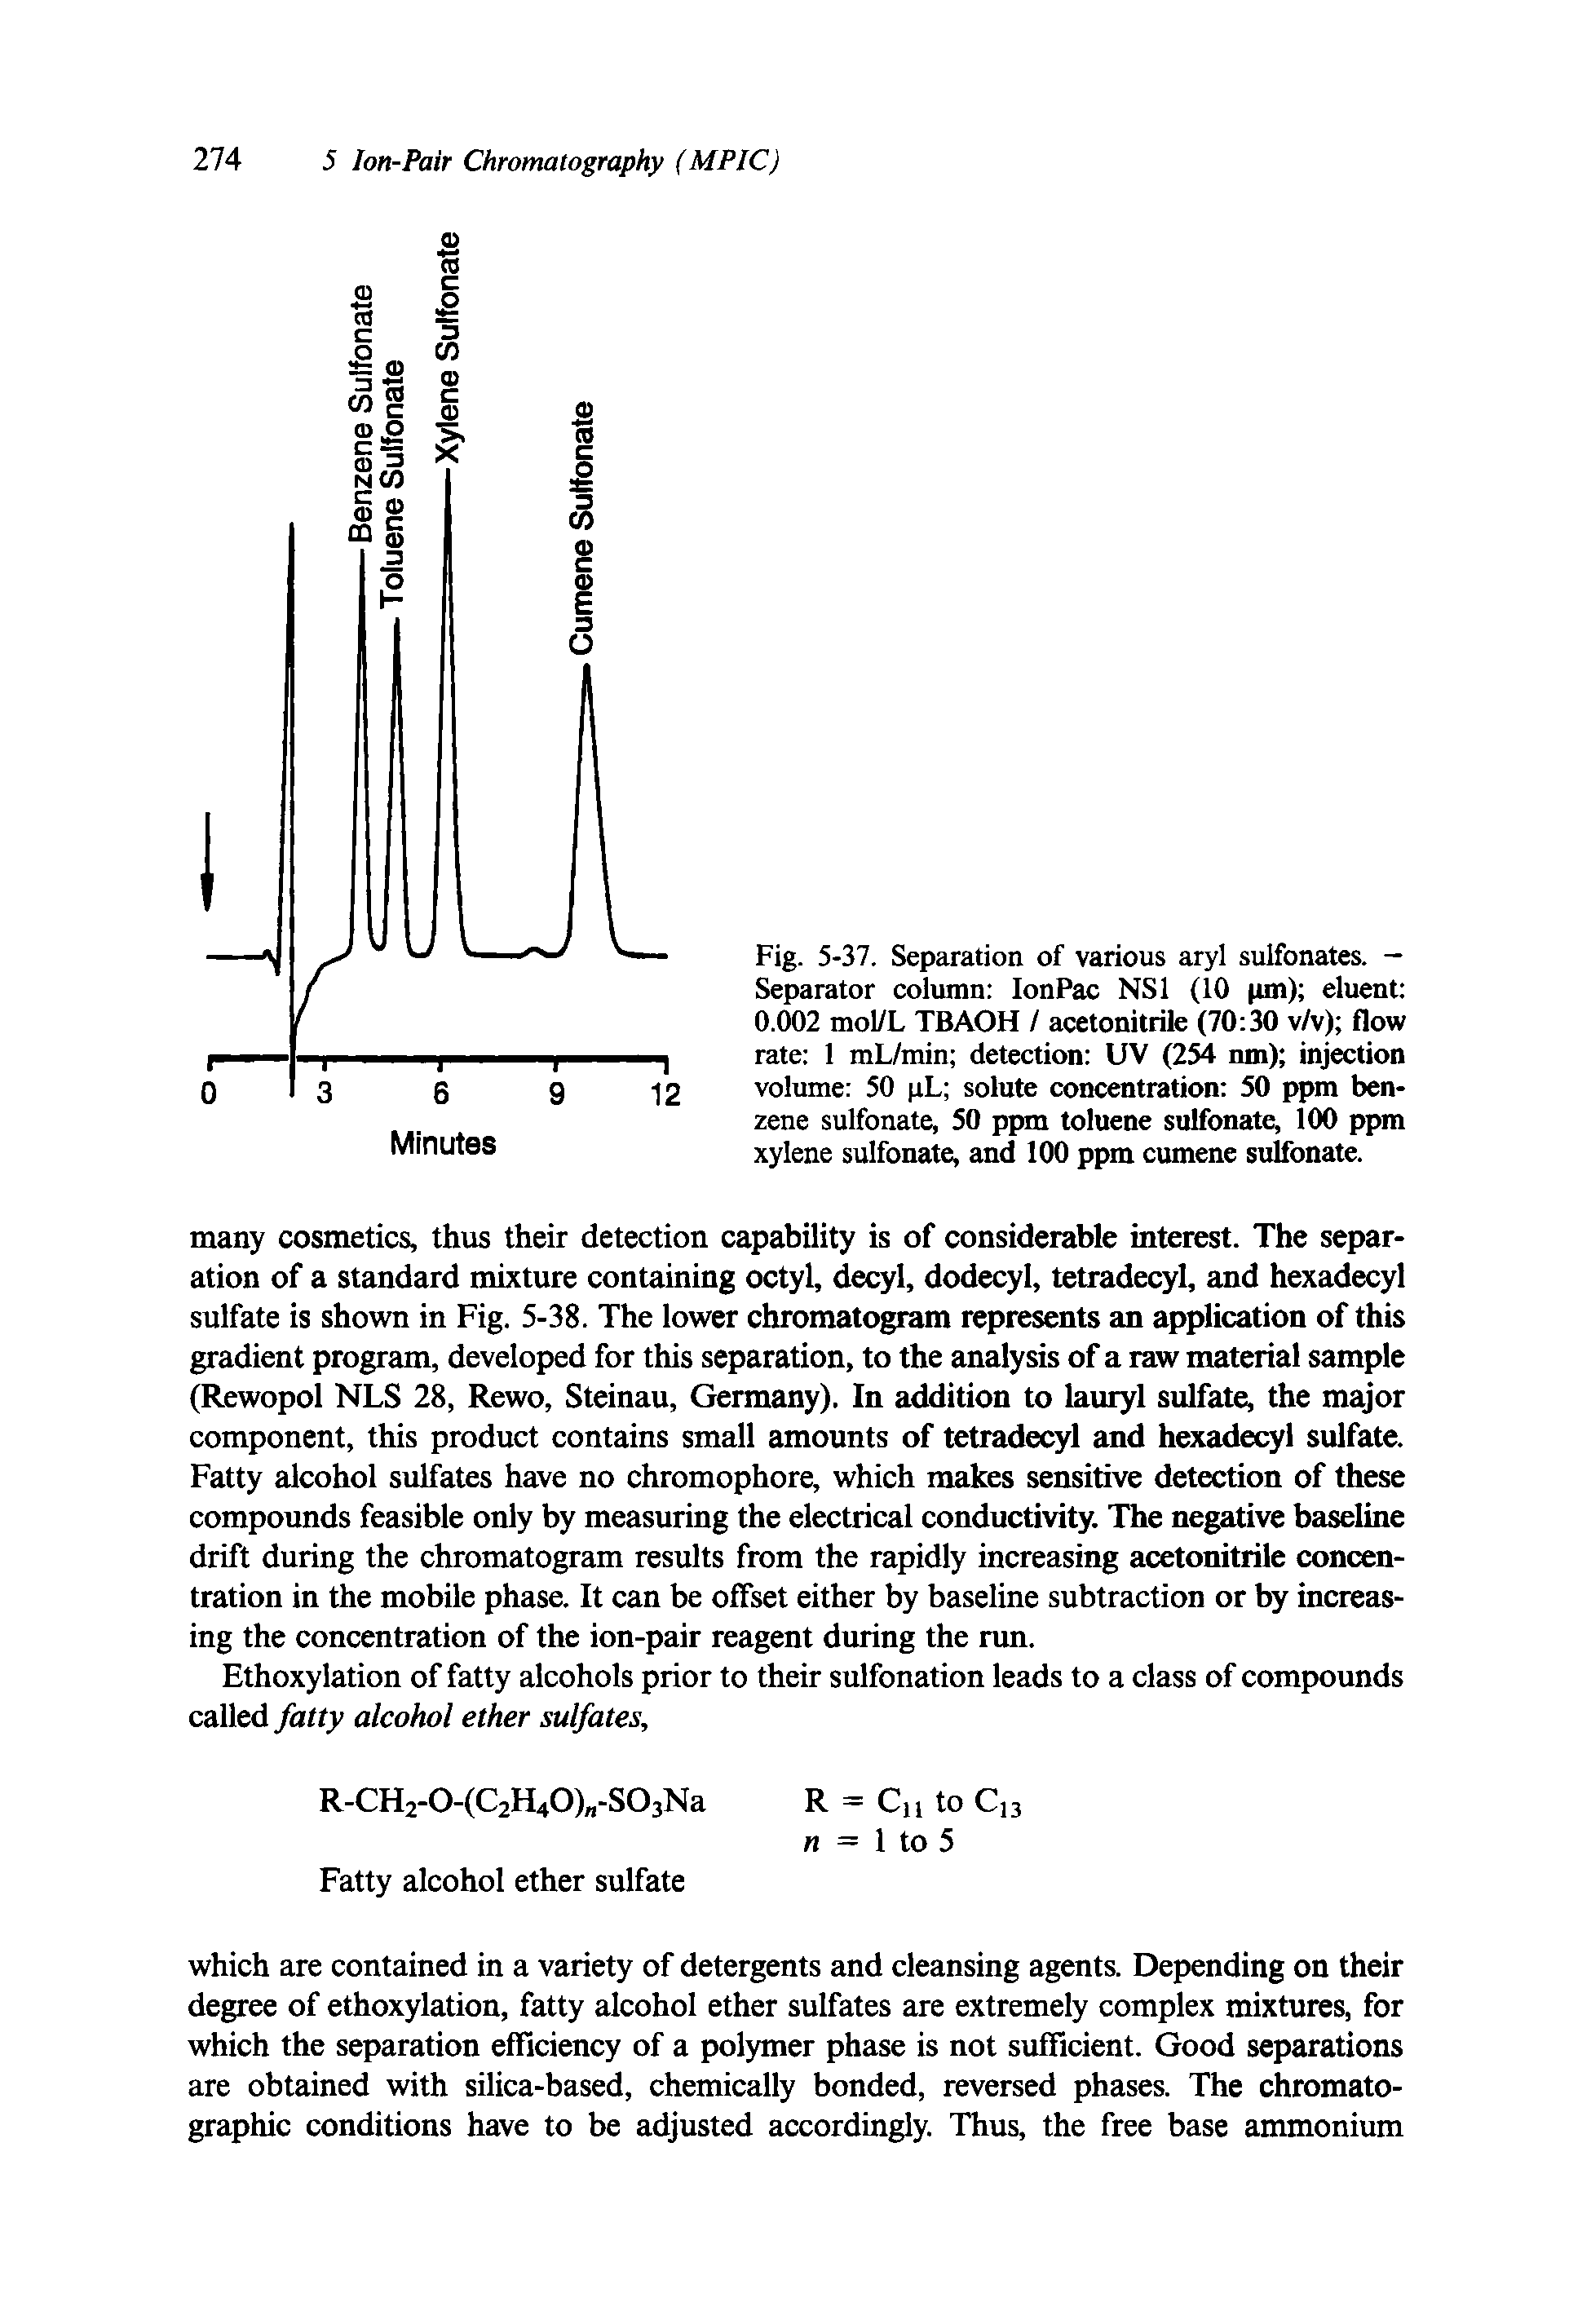 Fig. 5-37. Separation of various aryl sulfonates. — Separator column IonPac NS1 (10 pm) eluent 0.002 mol/L TBAOH / acetonitrile (70 30 v/v) flow rate 1 mL/min detection UV (254 nm) injection volume 50 pL solute concentration 50 ppm benzene sulfonate, 50 ppm toluene sulfonate, 100 ppm xylene sulfonate, and 100 ppm cumene sulfonate.